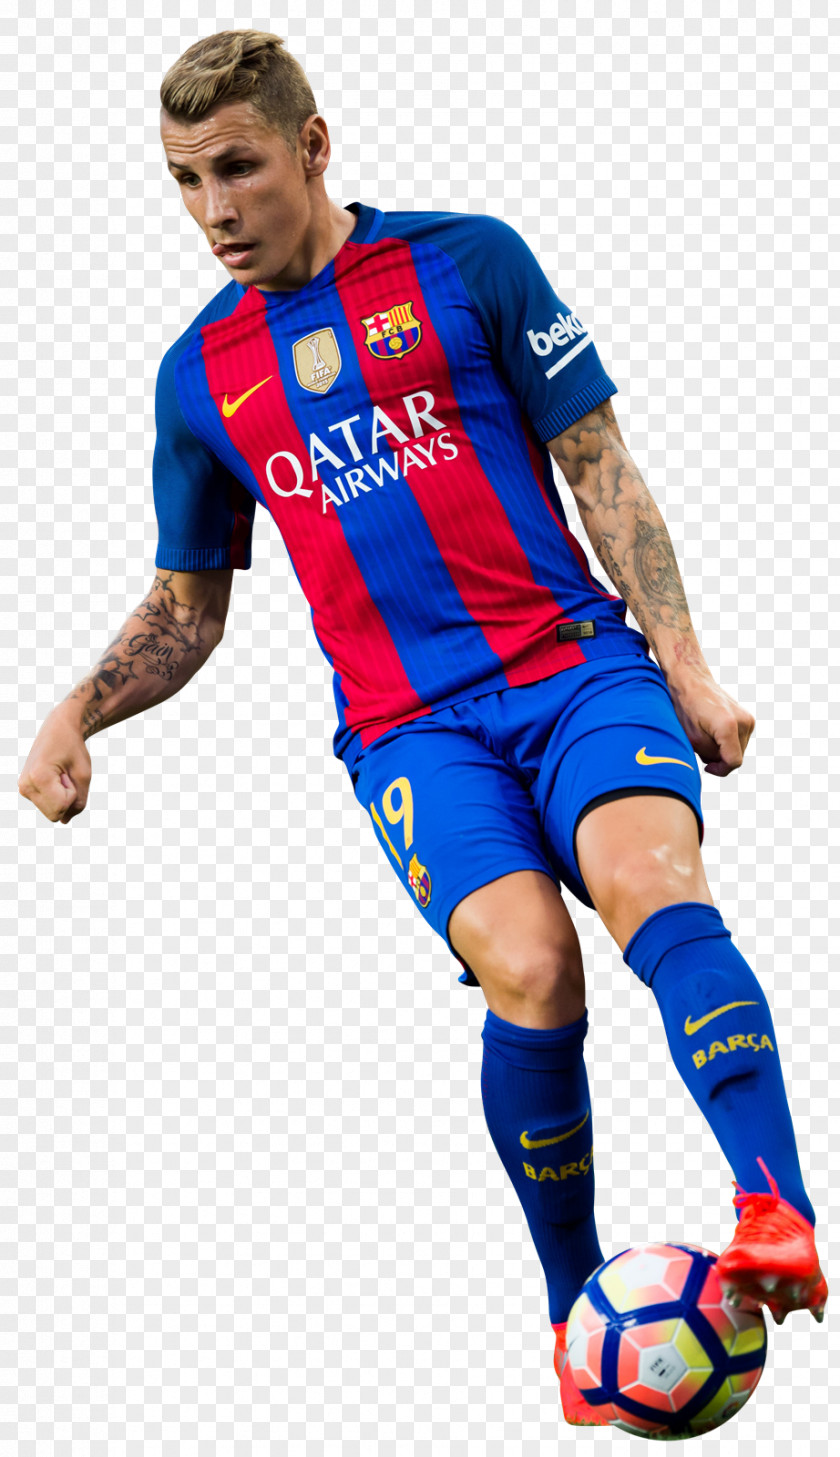 Fifa Messi 10 Lucas Digne FC Barcelona Soccer Player Football Rendering PNG